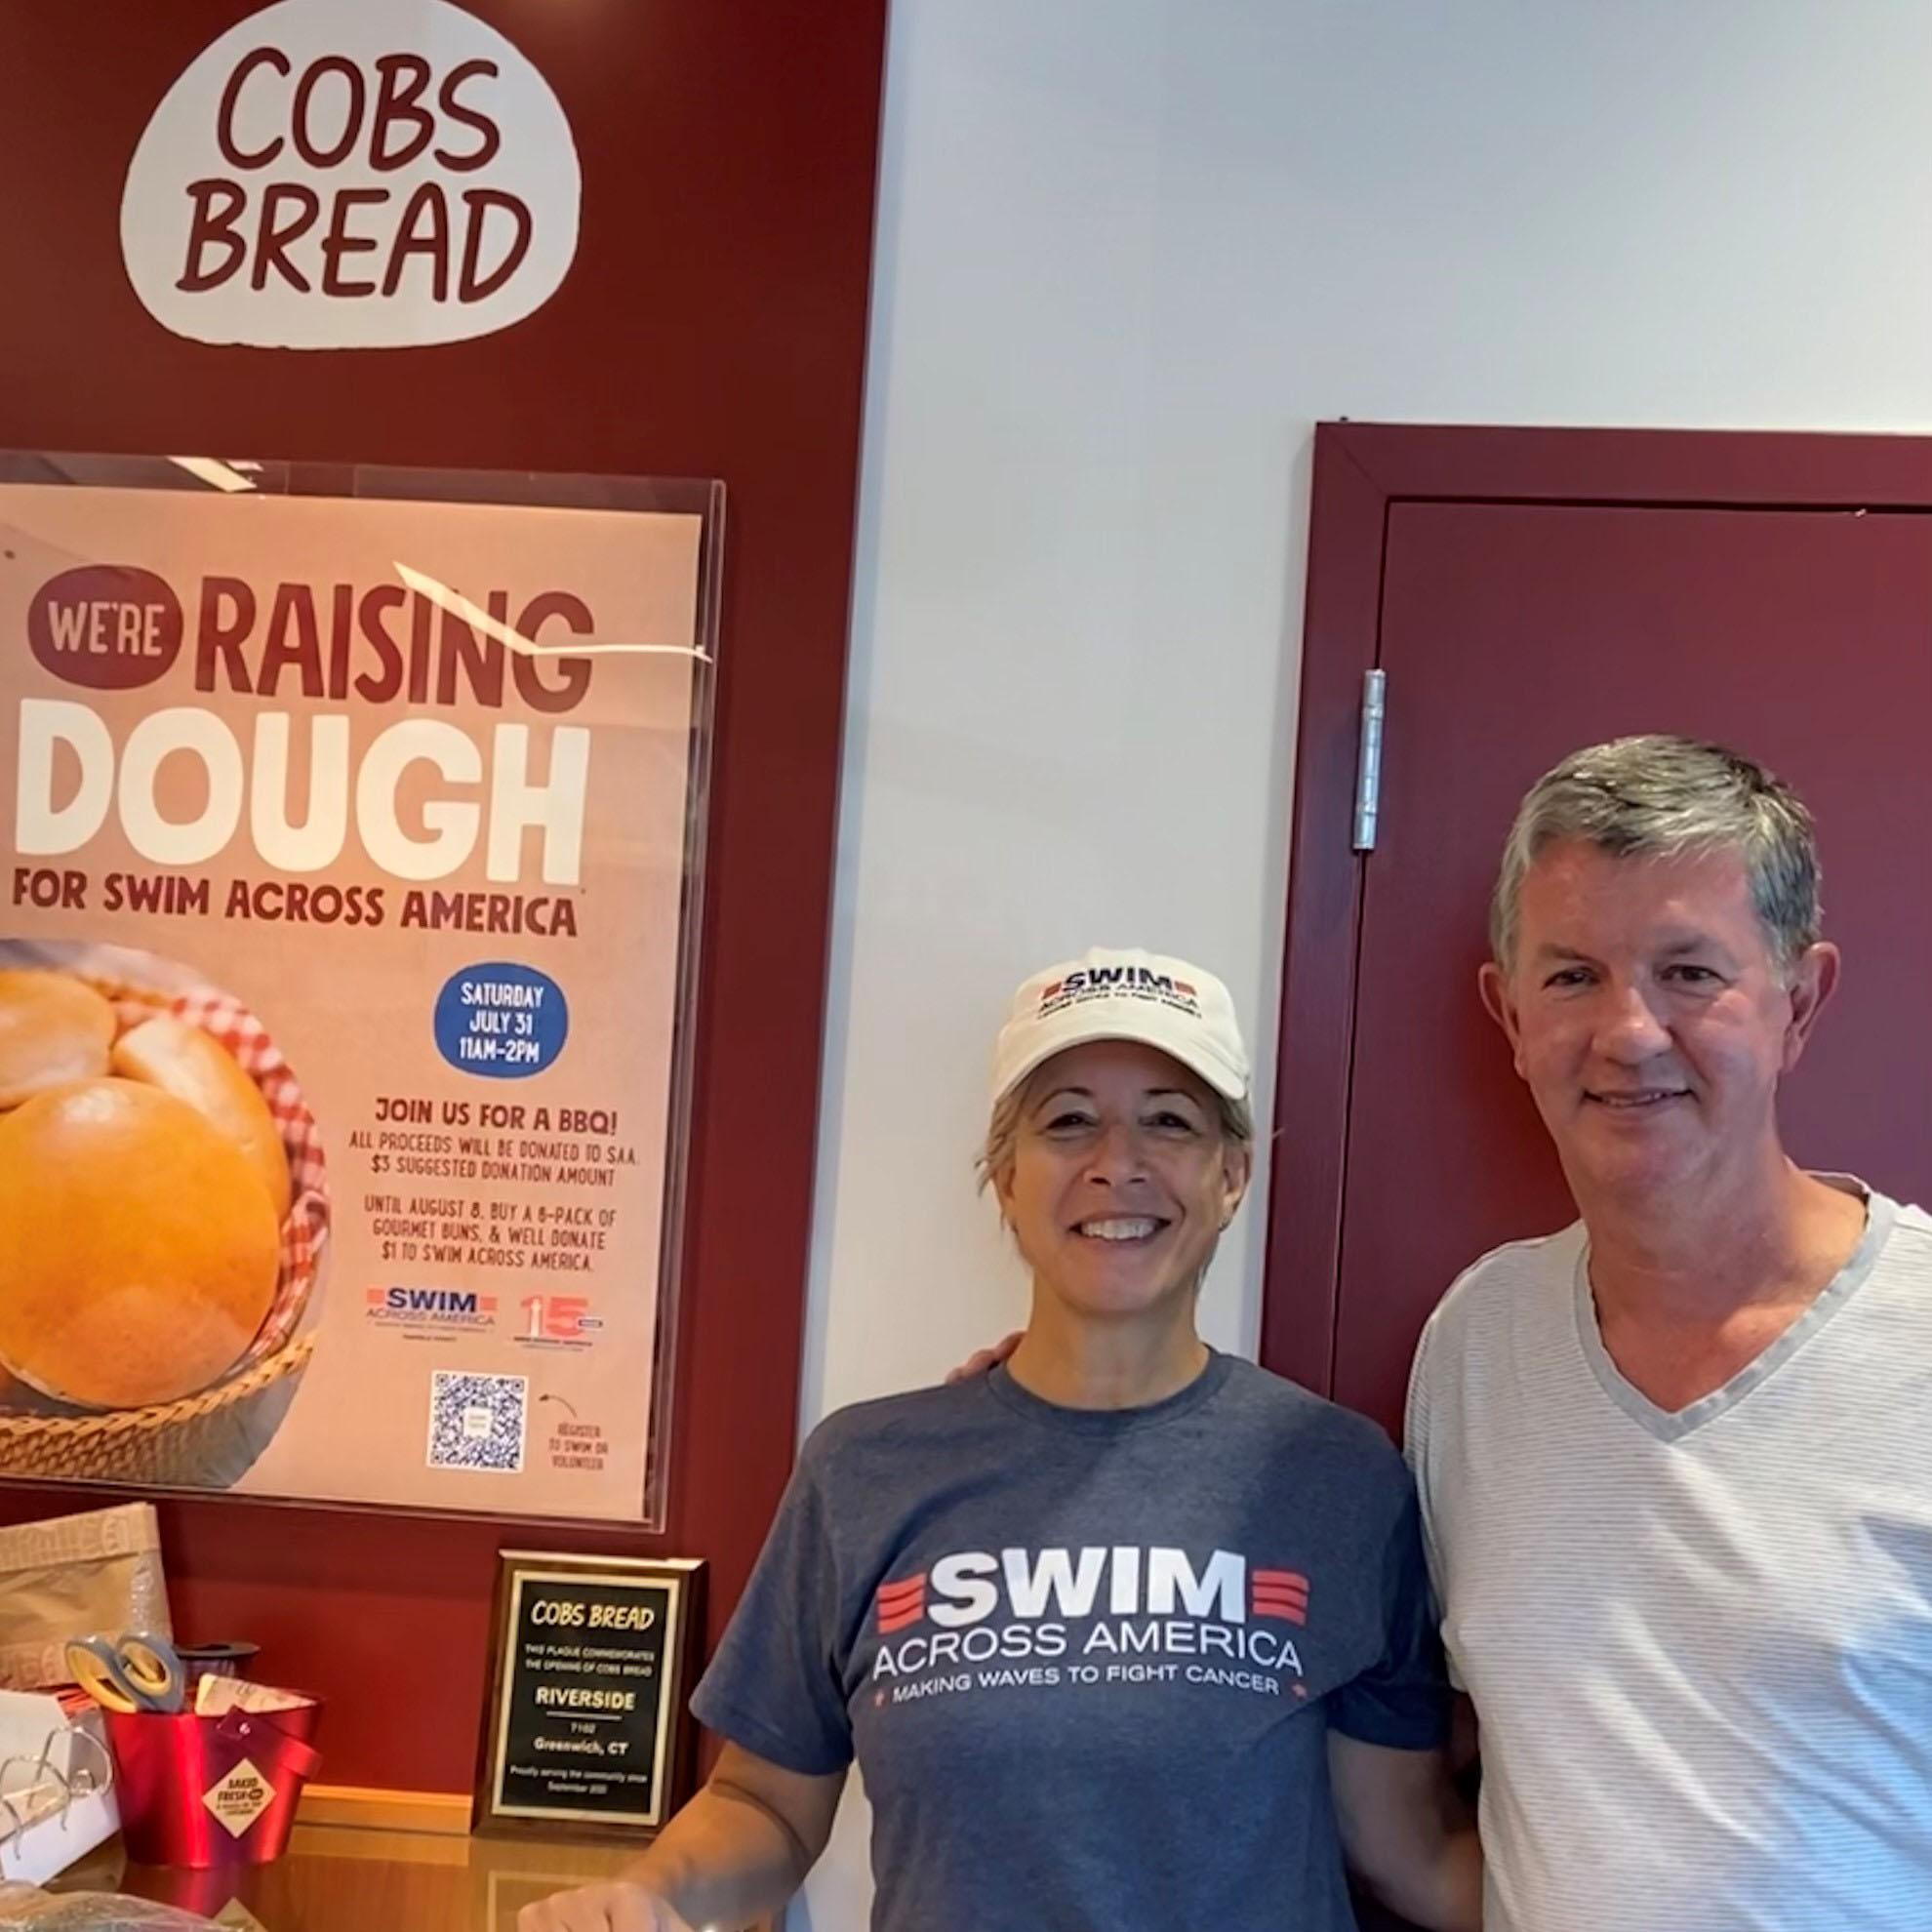 COBS Bread in Greenwich/Stamford raises dough to support Swim Across America Fairfield County - Greenwich Time